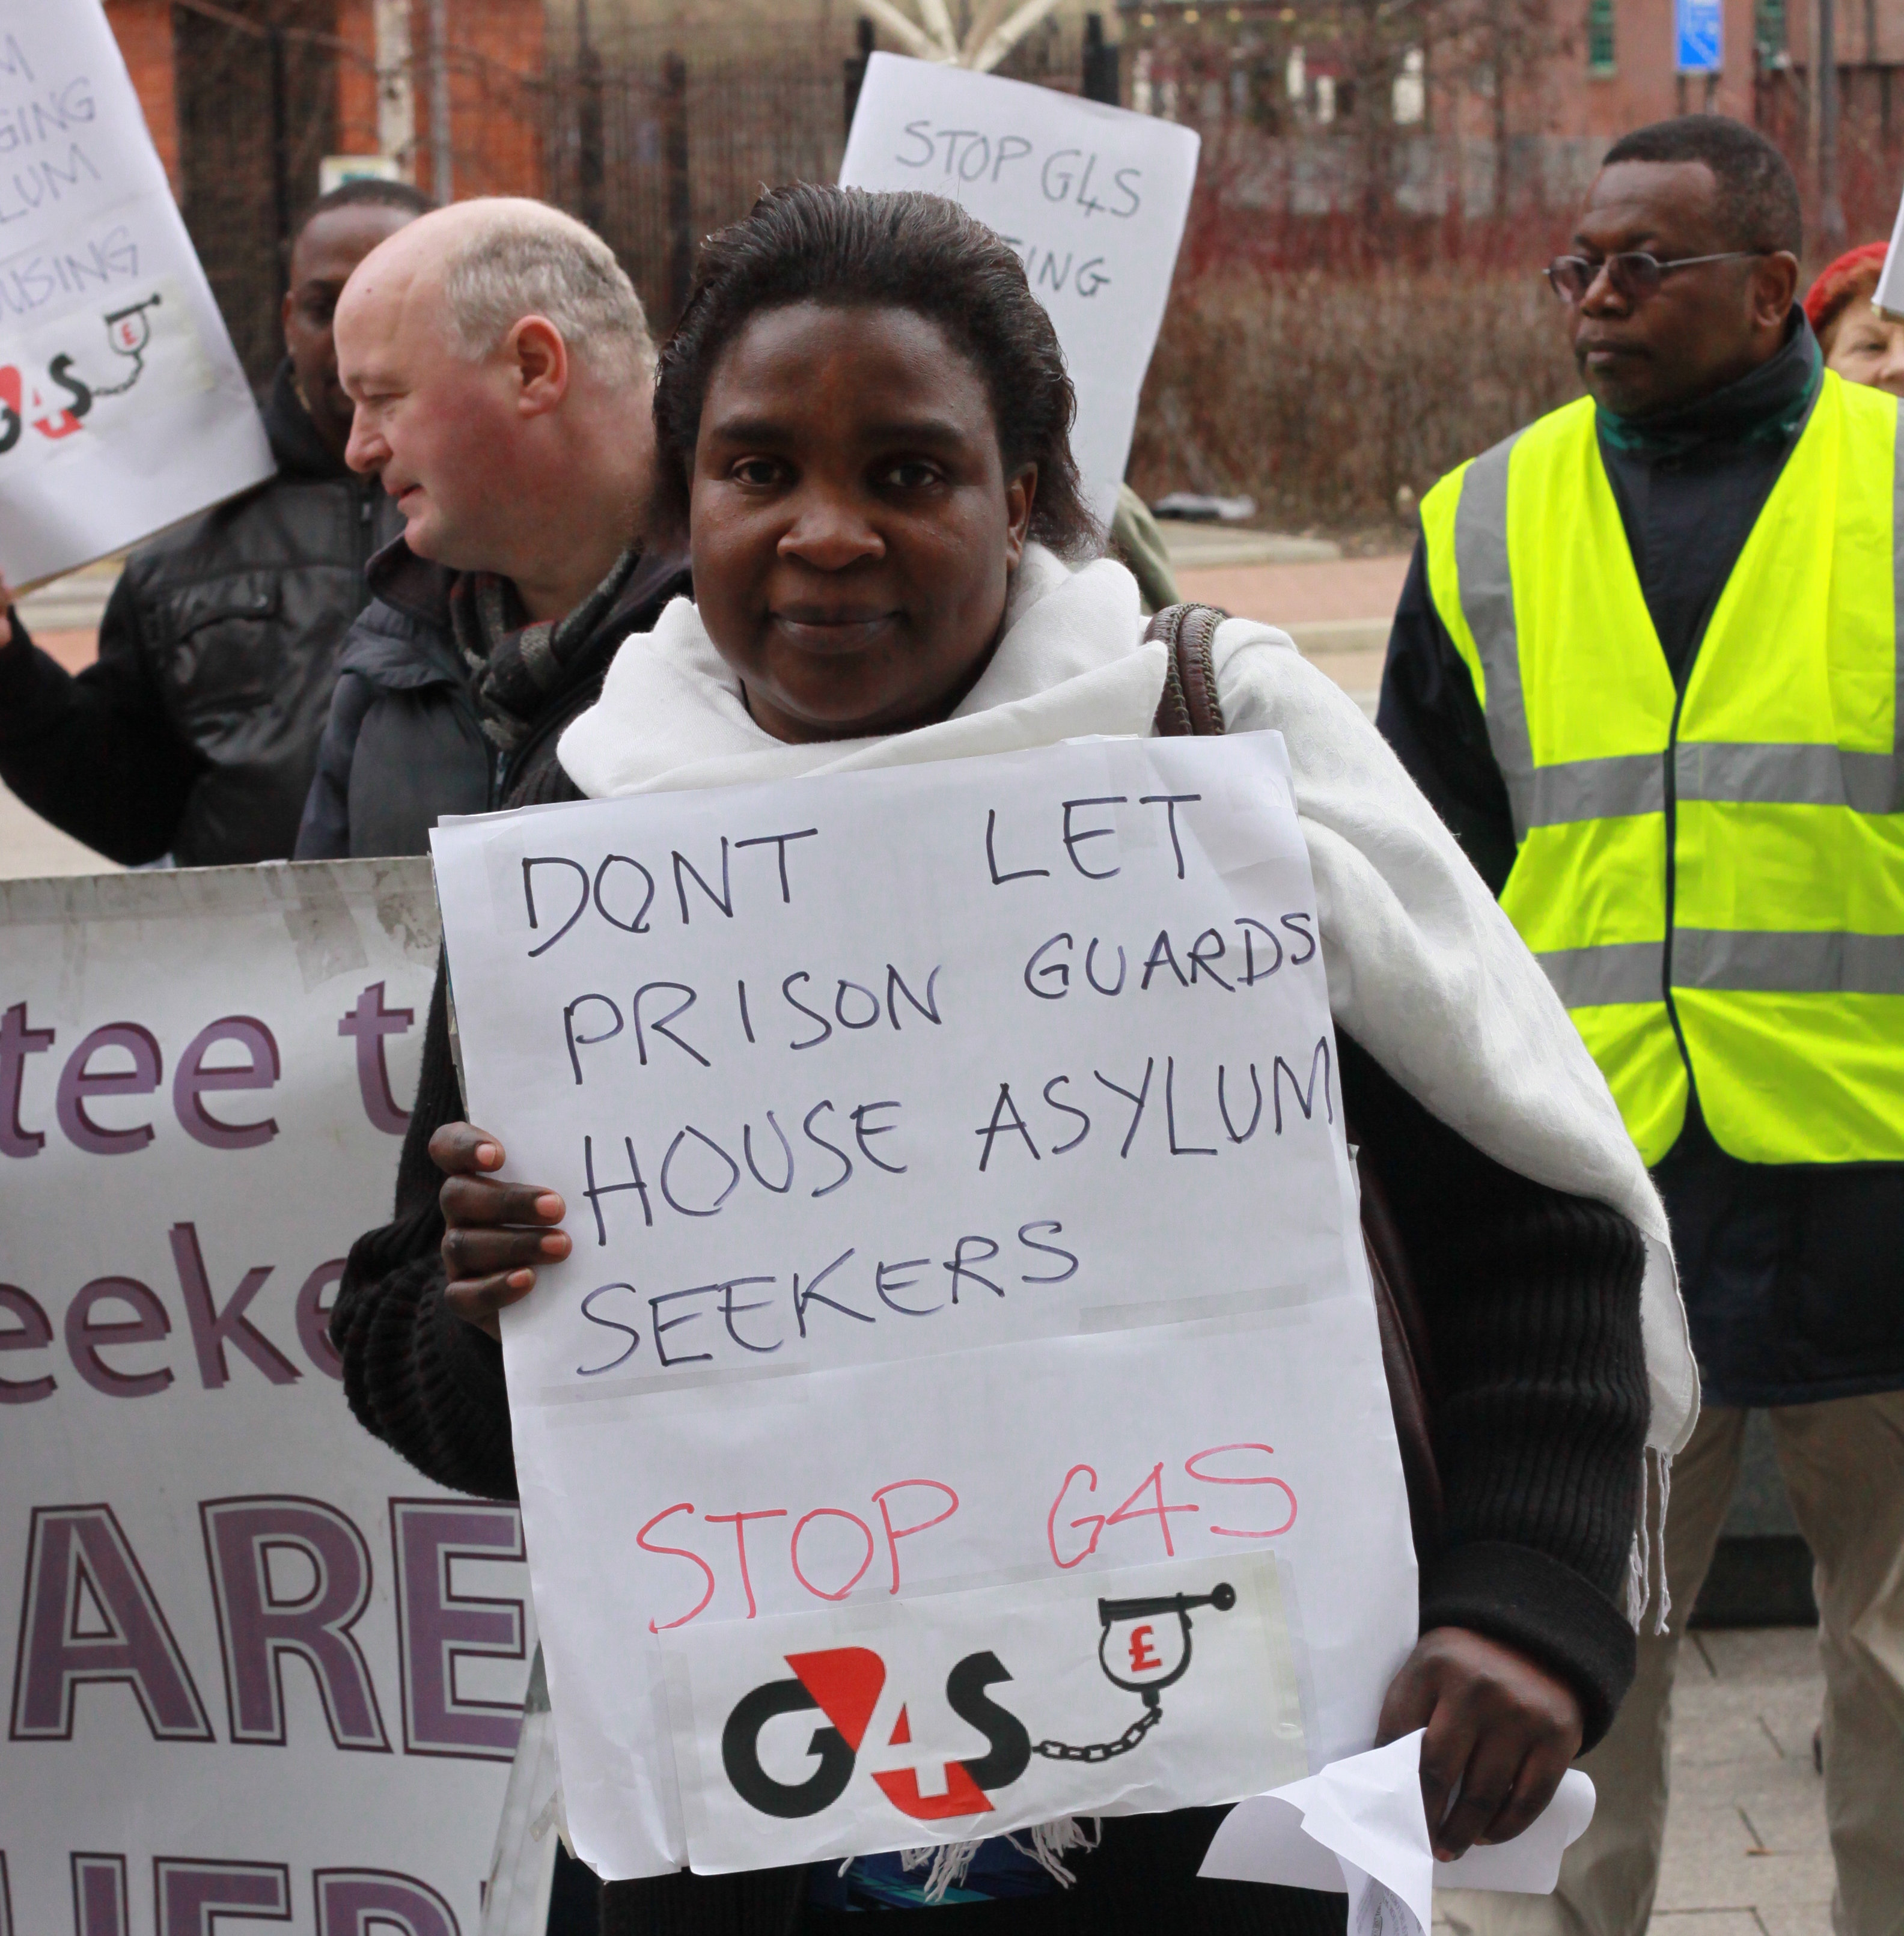 Rats in the yard: 4 years of UK asylum housing by G4S